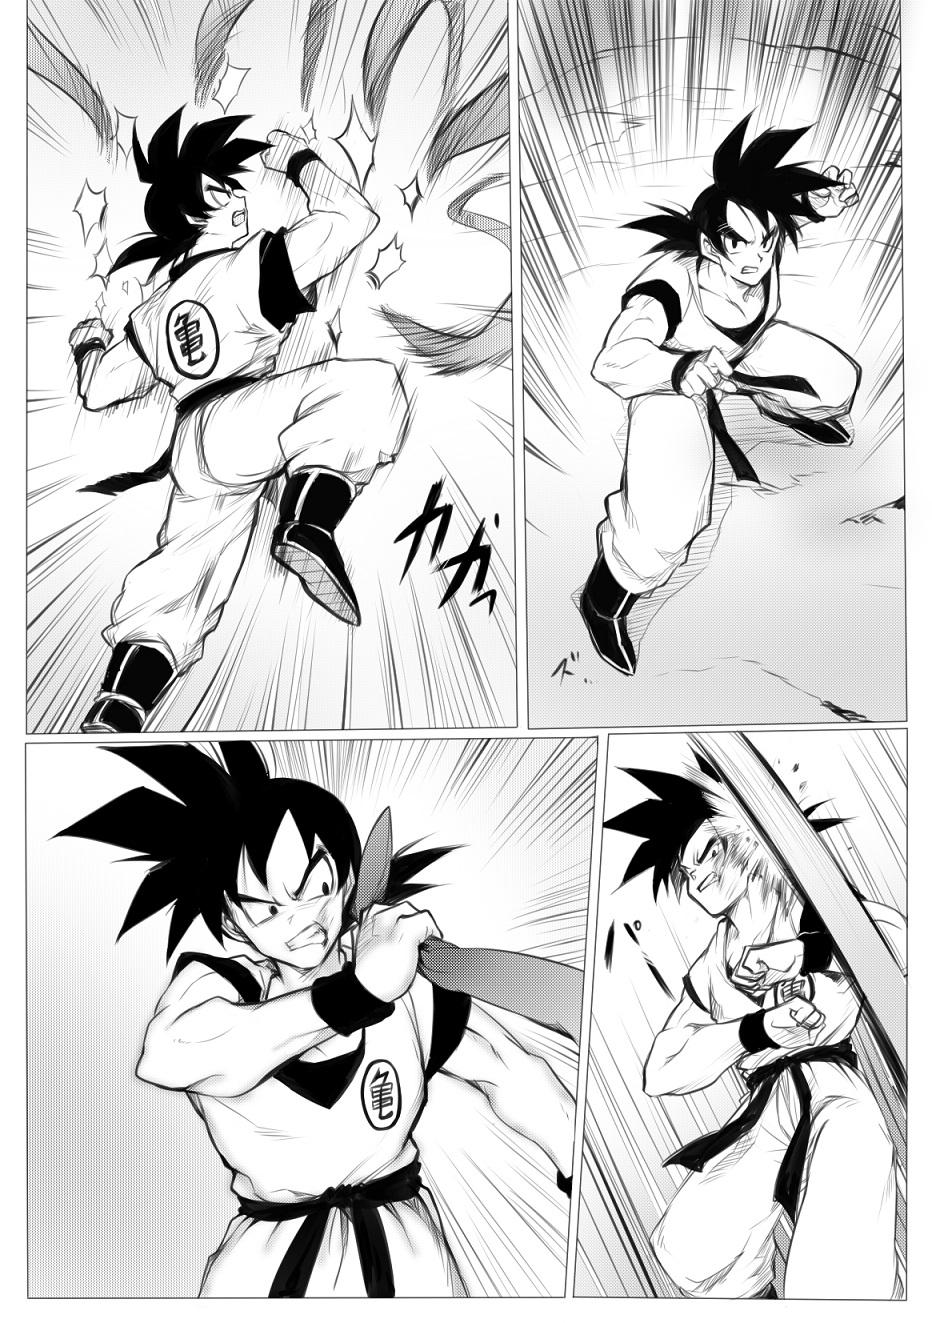 Doggy 接触 - Dragon ball z College - Page 8